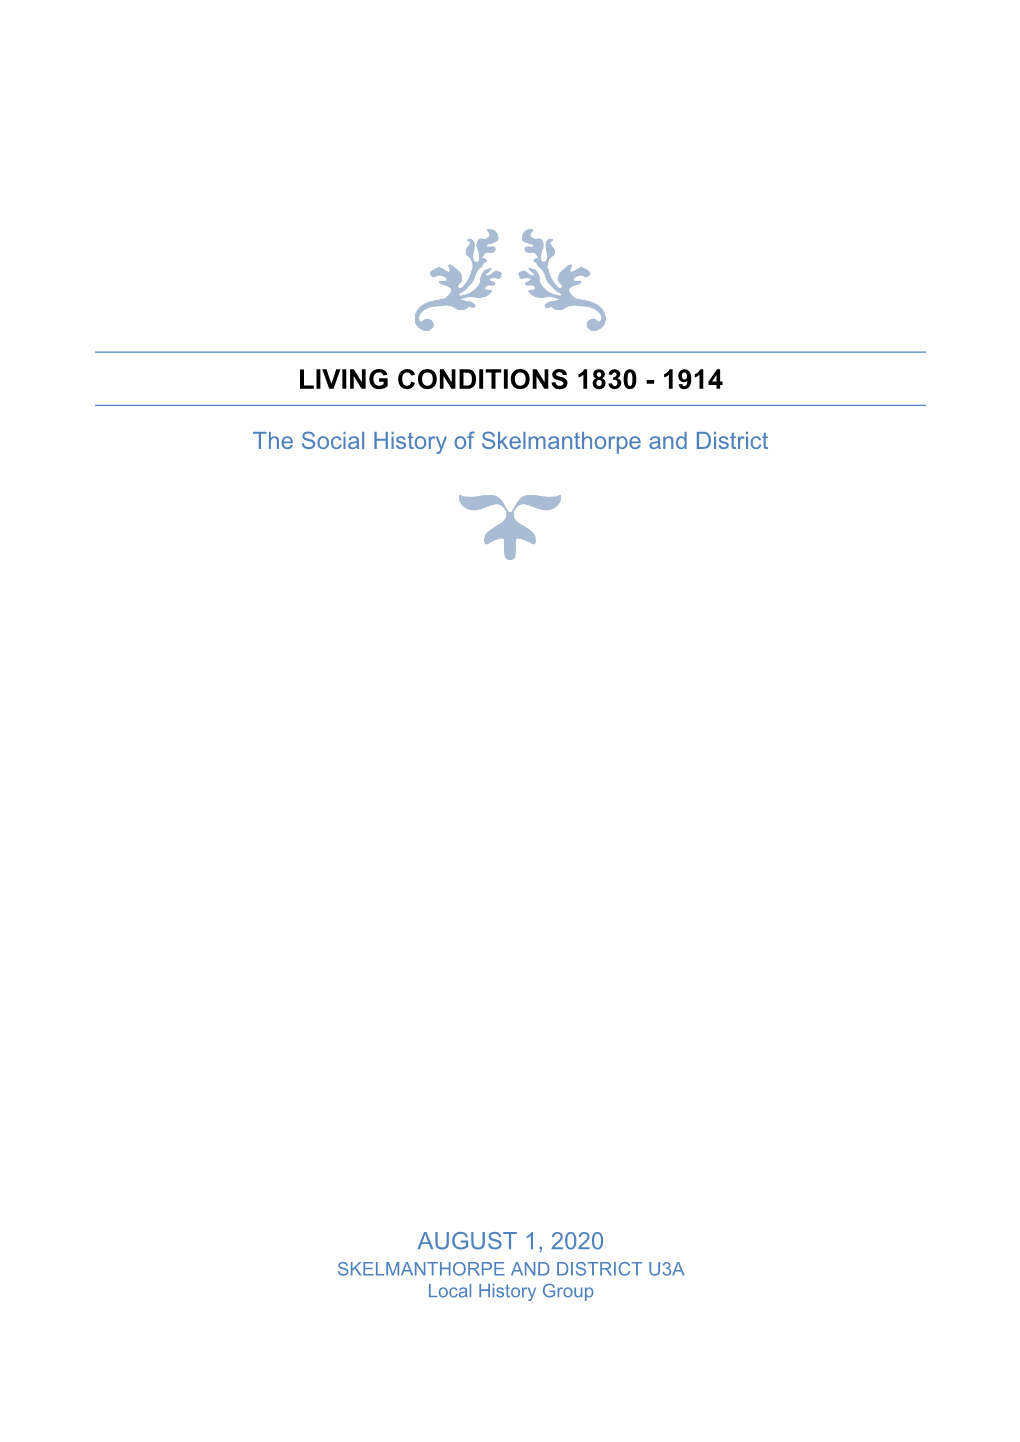 Living Conditions Edited 2020